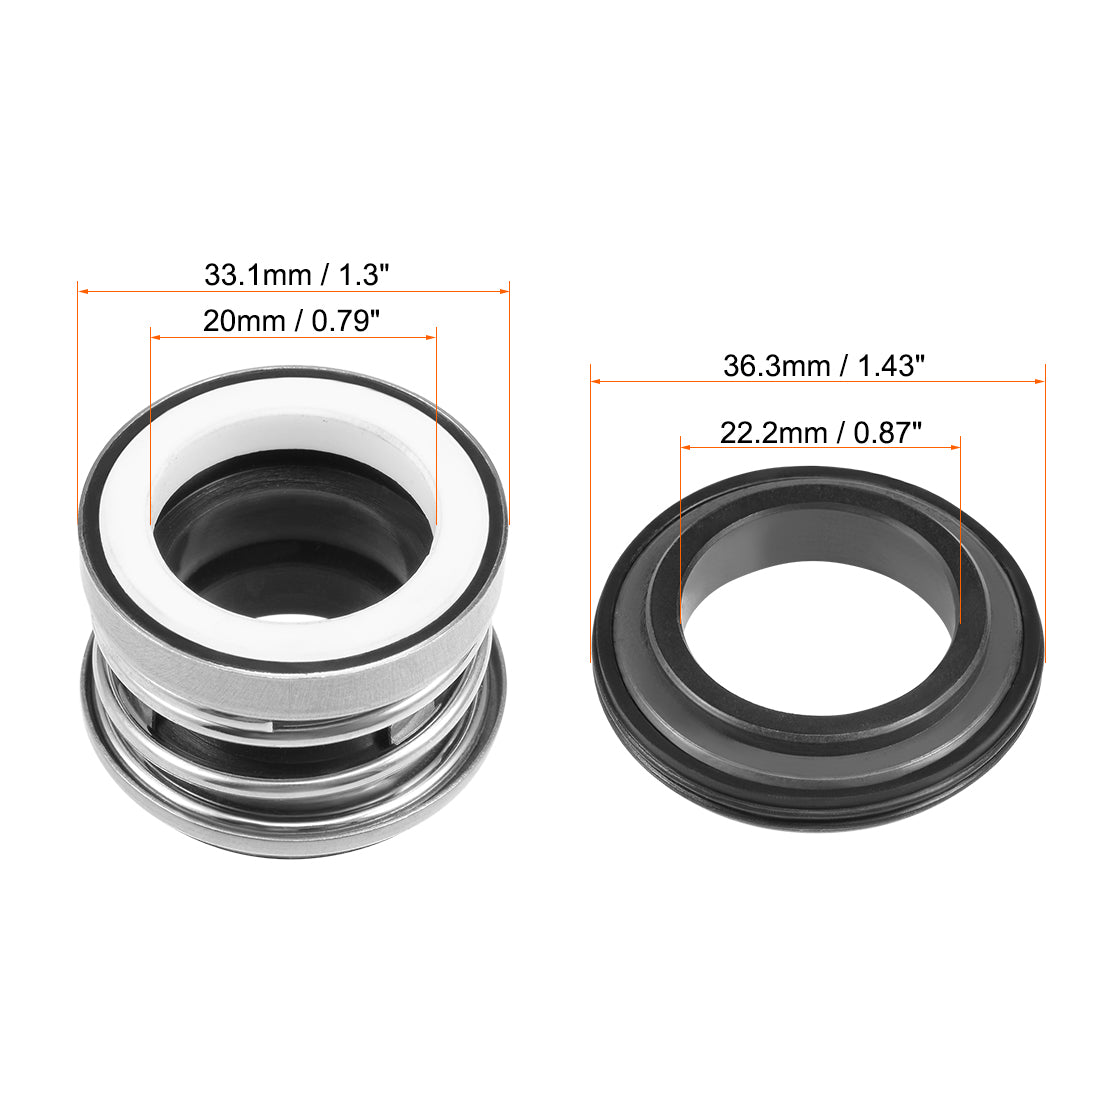 uxcell Uxcell Mechanical Shaft Seal Replacement for Pool Spa Pump 104-20 1Pcs